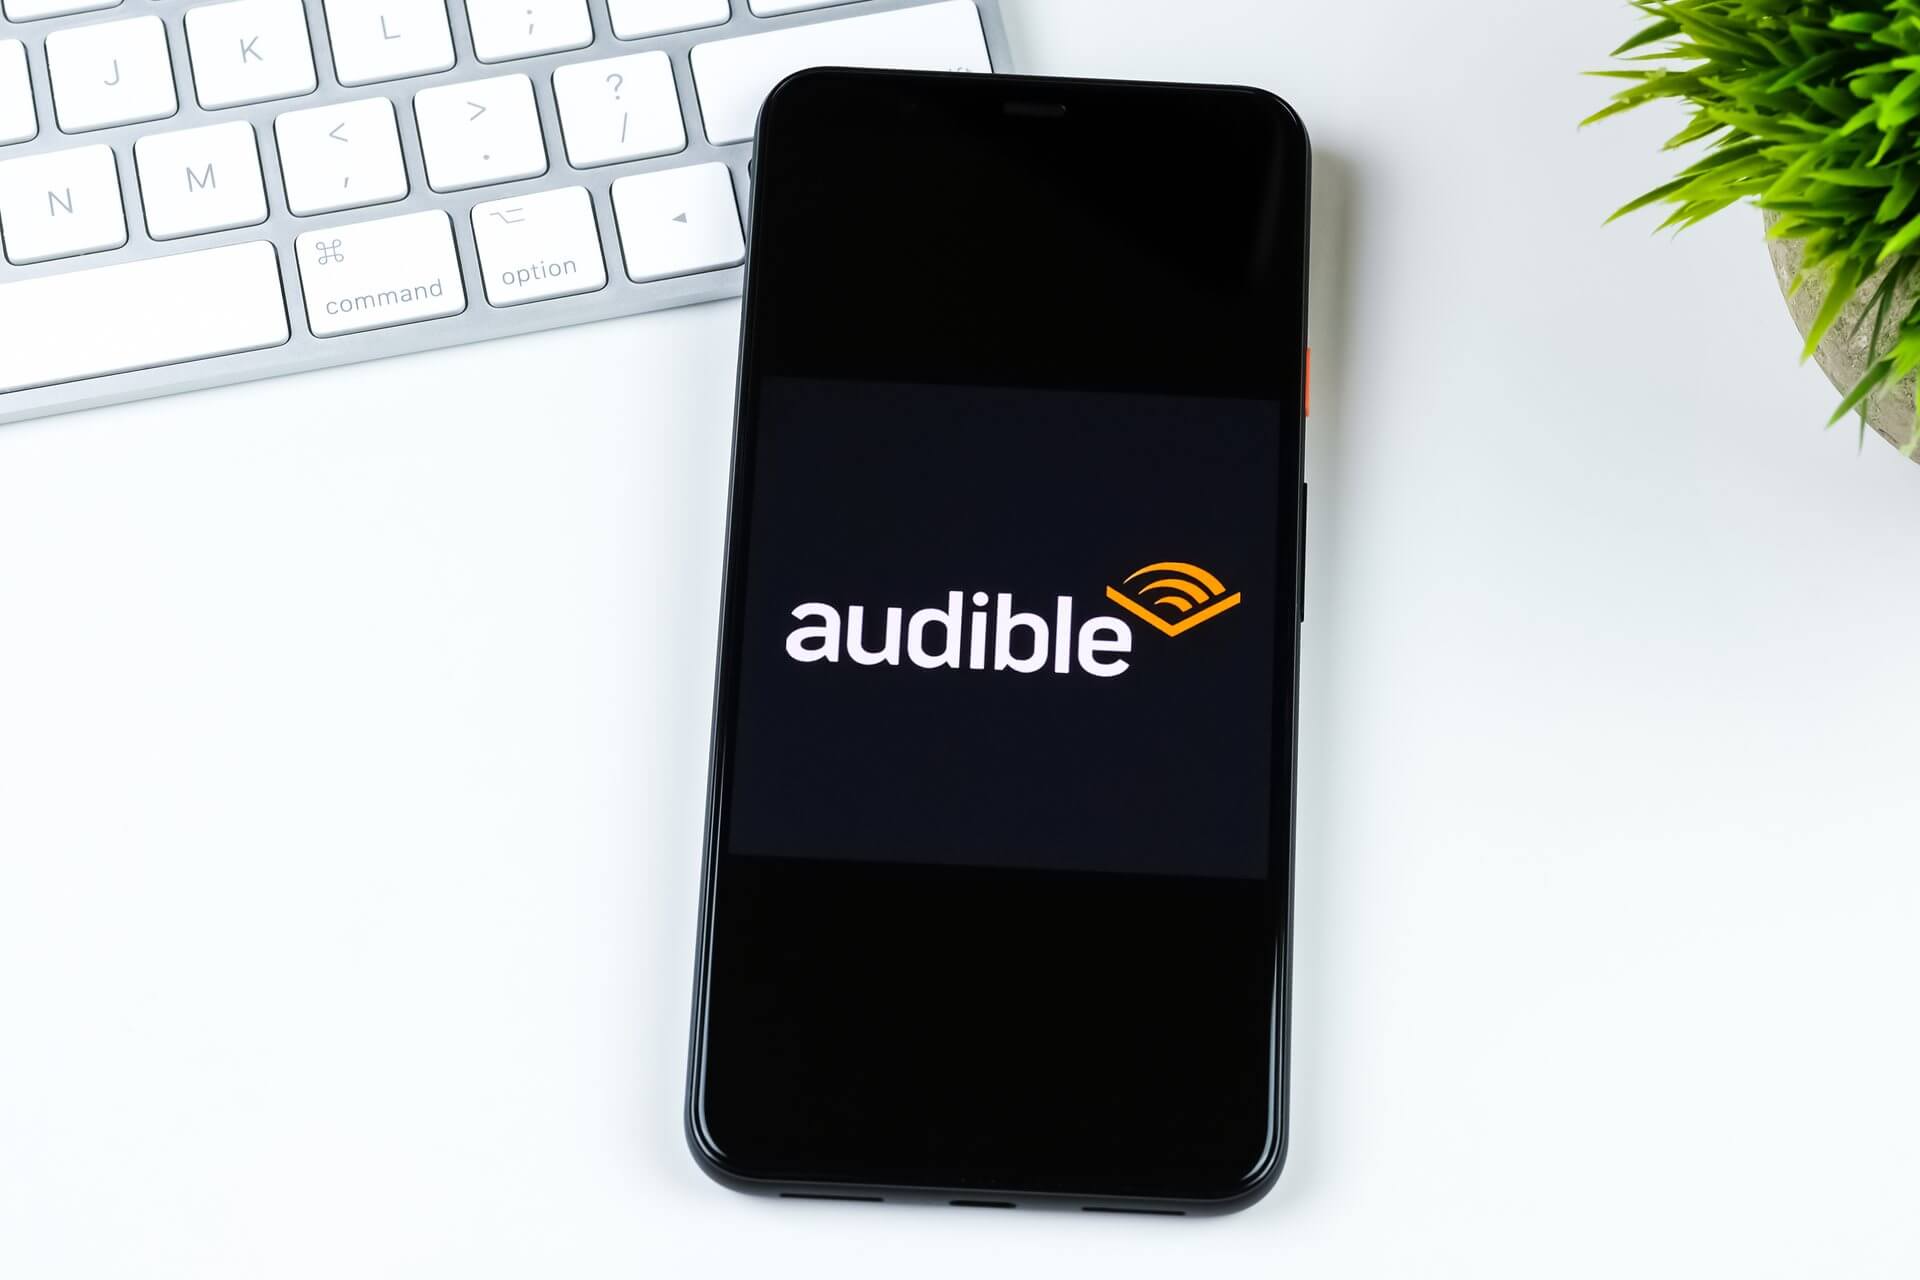 How to Download Audible App for Windows 10?